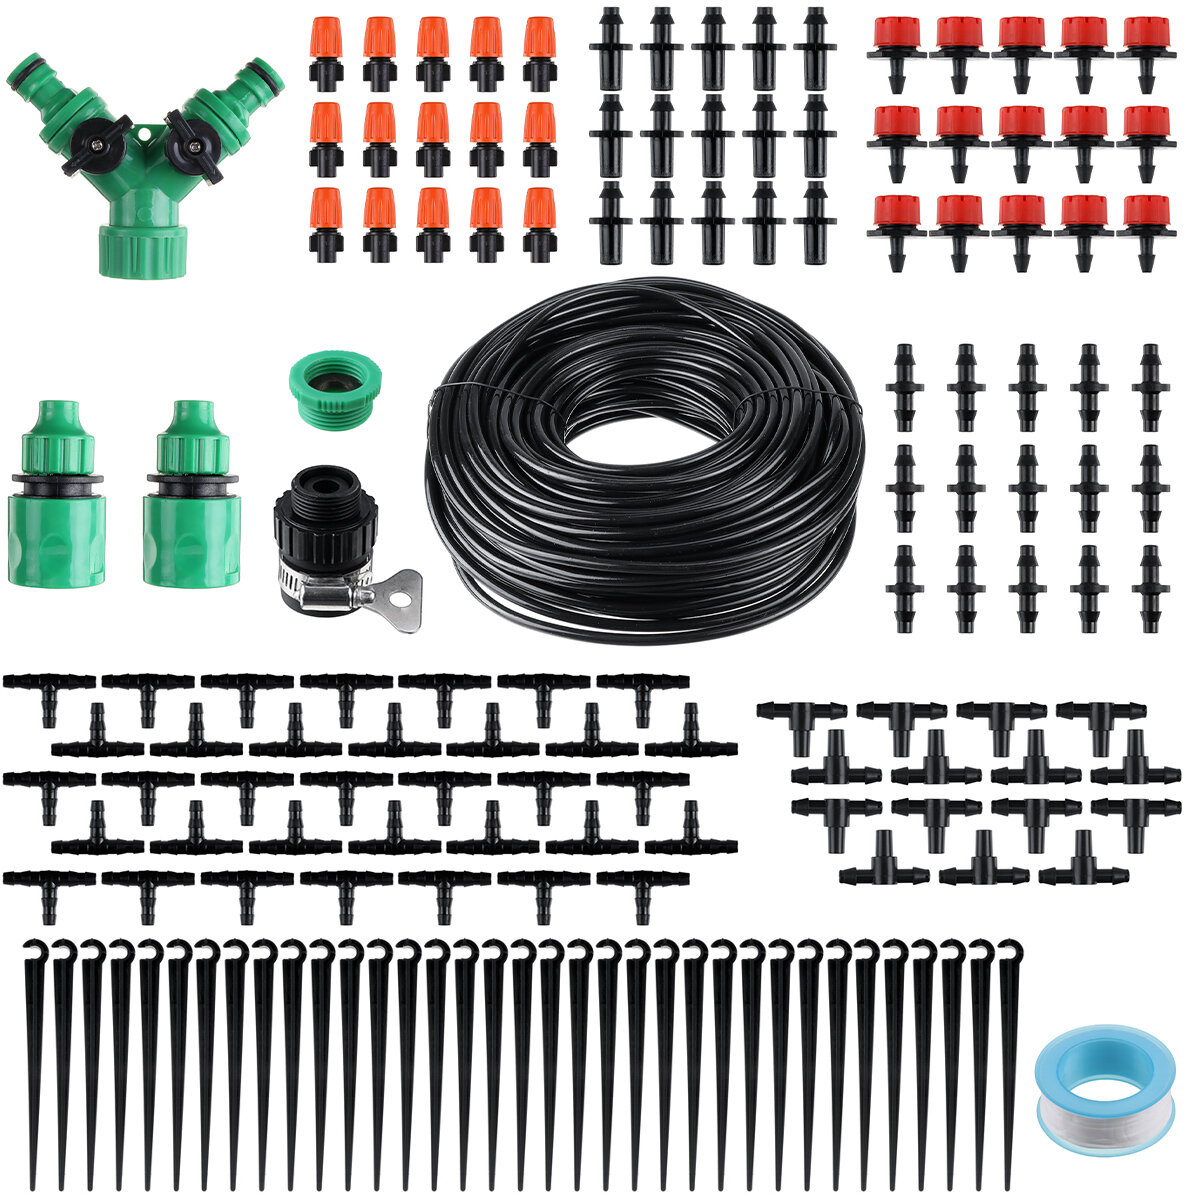 

40m Manual Automatic DIY Micro Drip Irrigation System Auto Manual Timer Plant Watering Garden Hose Tool Set